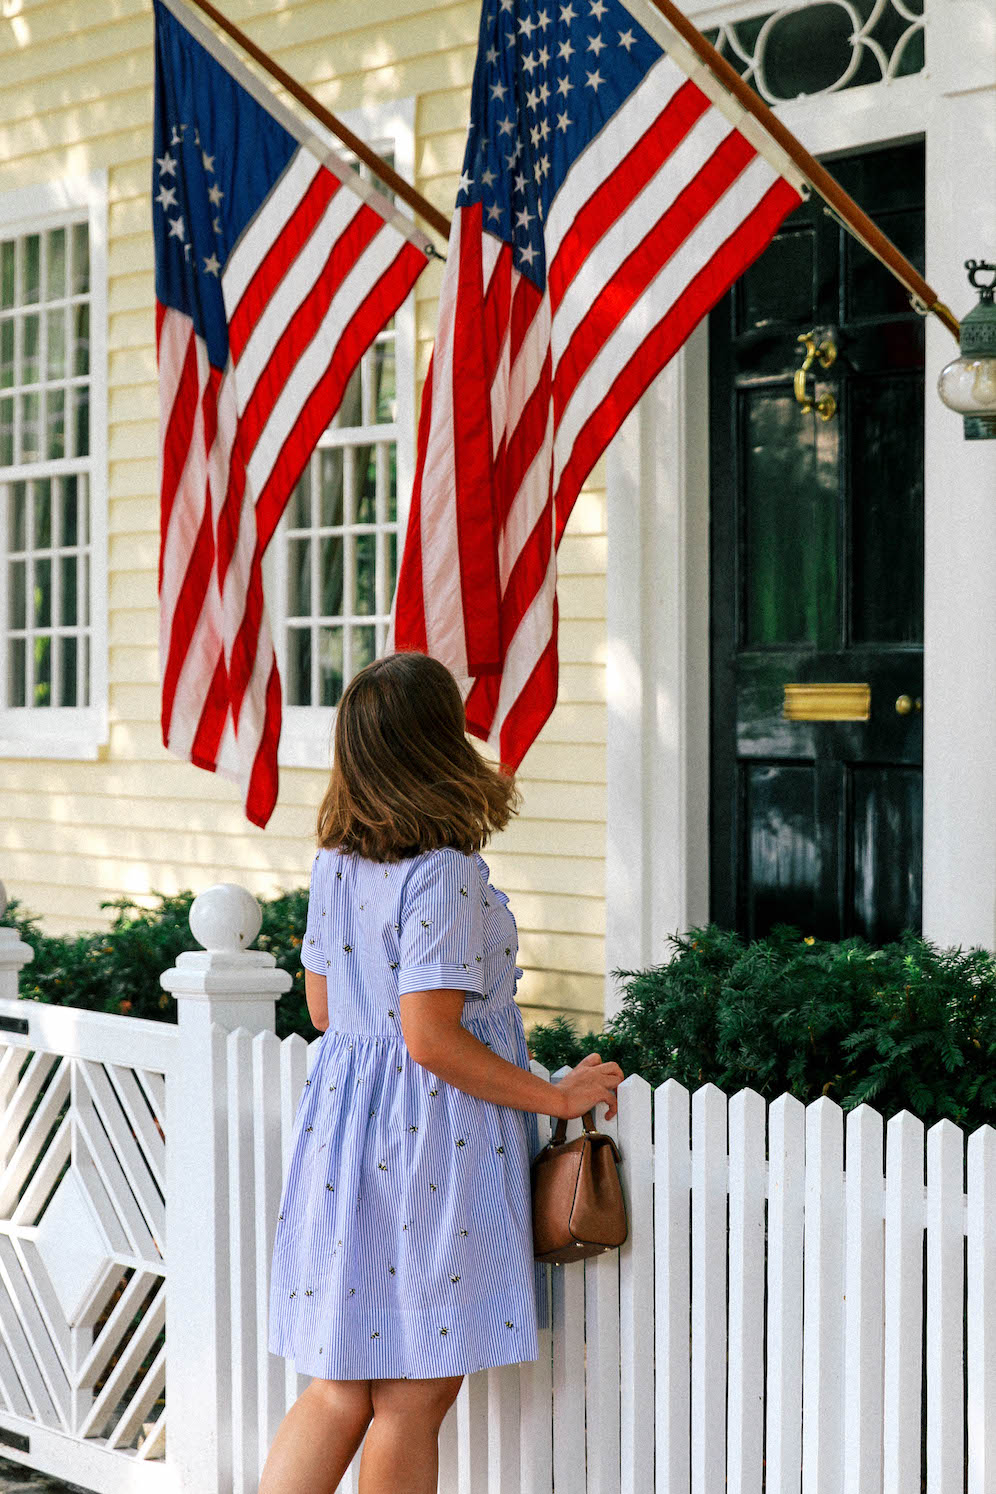 How To Up You Home's Curb Appeal With Flagpoles The Coastal Confidence Aubrey Yandow